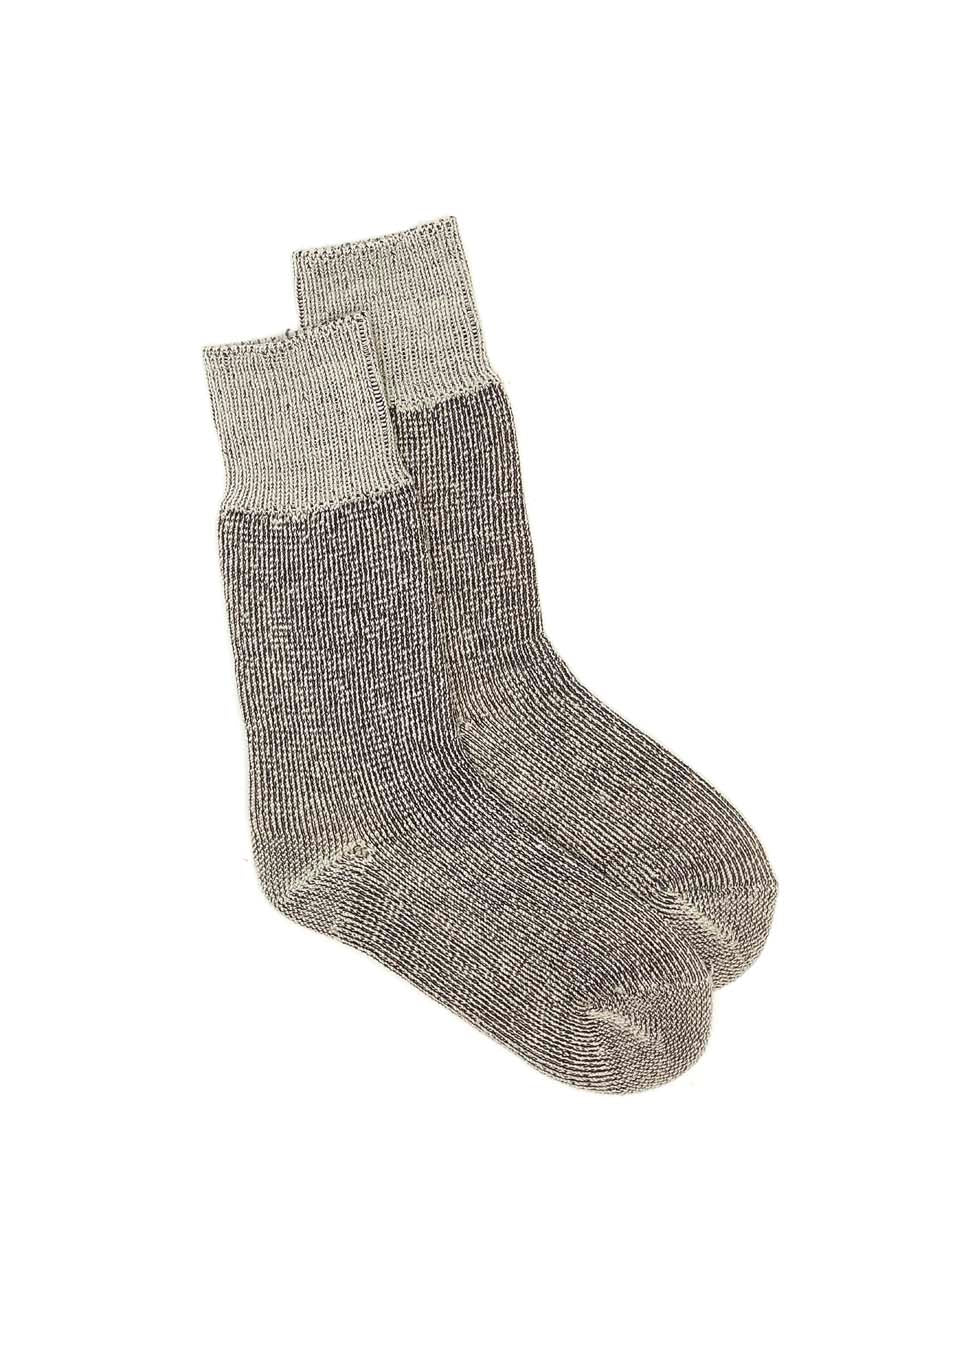 High Country Socks 3 Pack - Charcoal